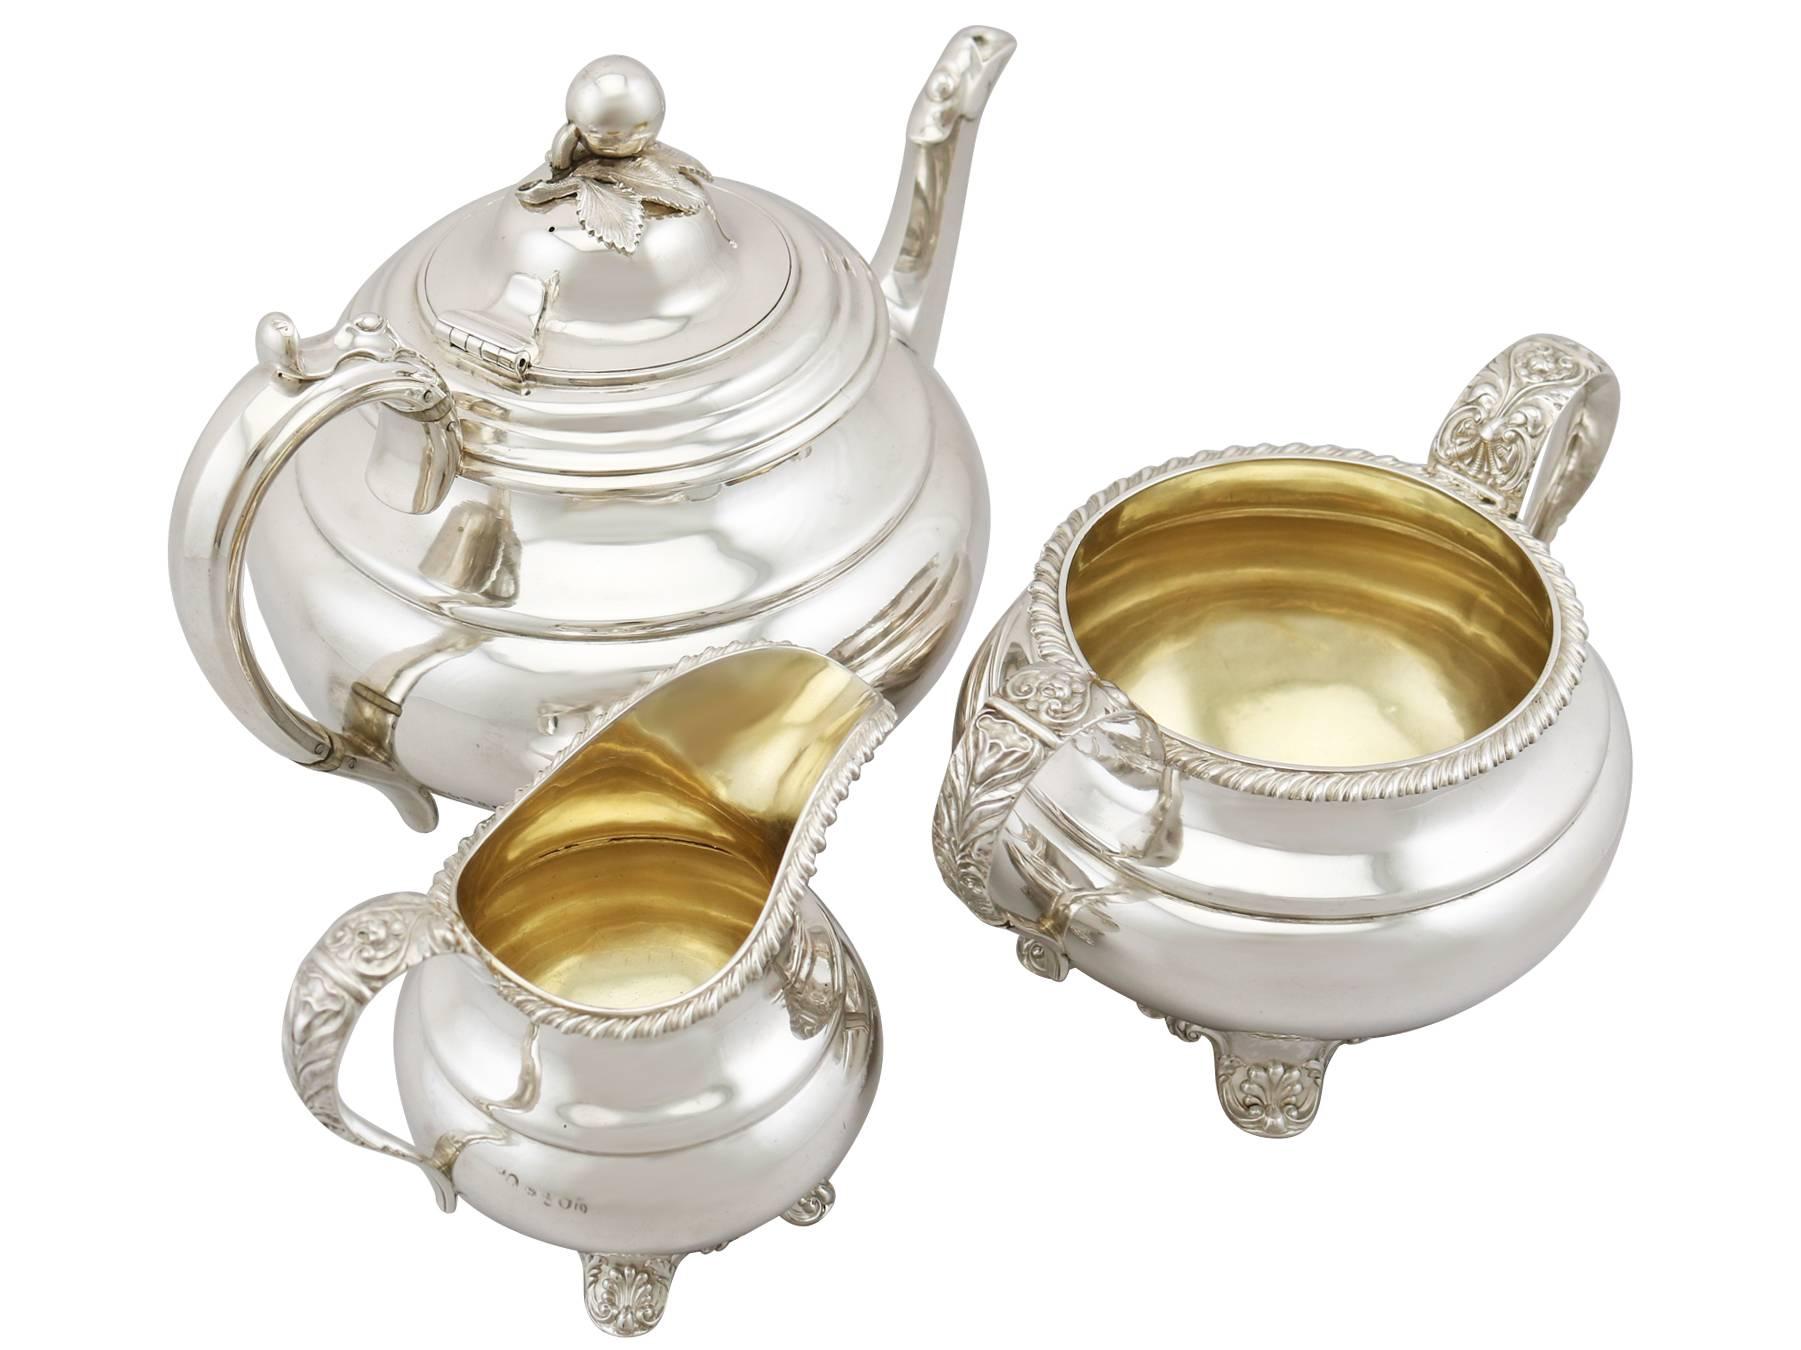 An exceptional, fine and impressive antique Victorian Newcastle sterling silver three piece tea service / tea set; part of our silver teaware collection.

This exceptional antique Victorian Newcastle sterling silver three piece tea service